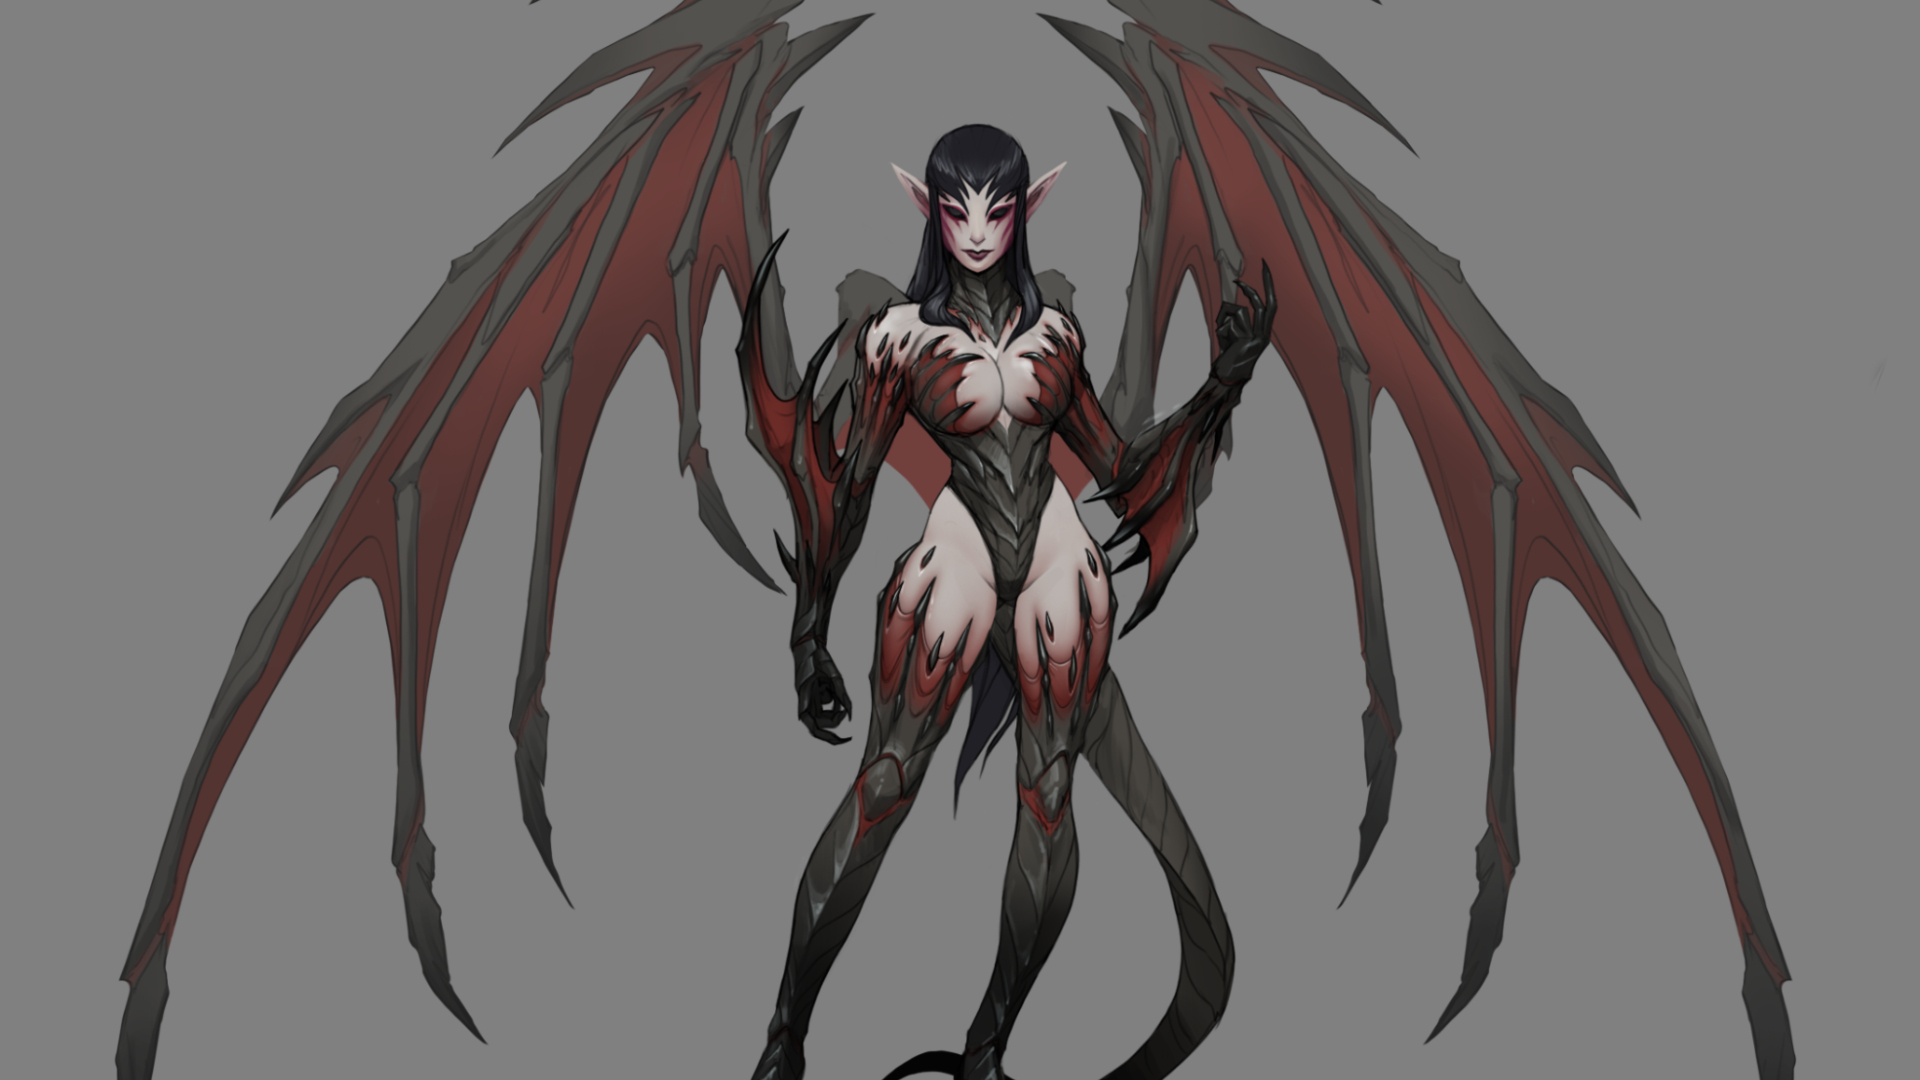 V Rising's new succubus enemy, a bat-winged woman with red and black clothing